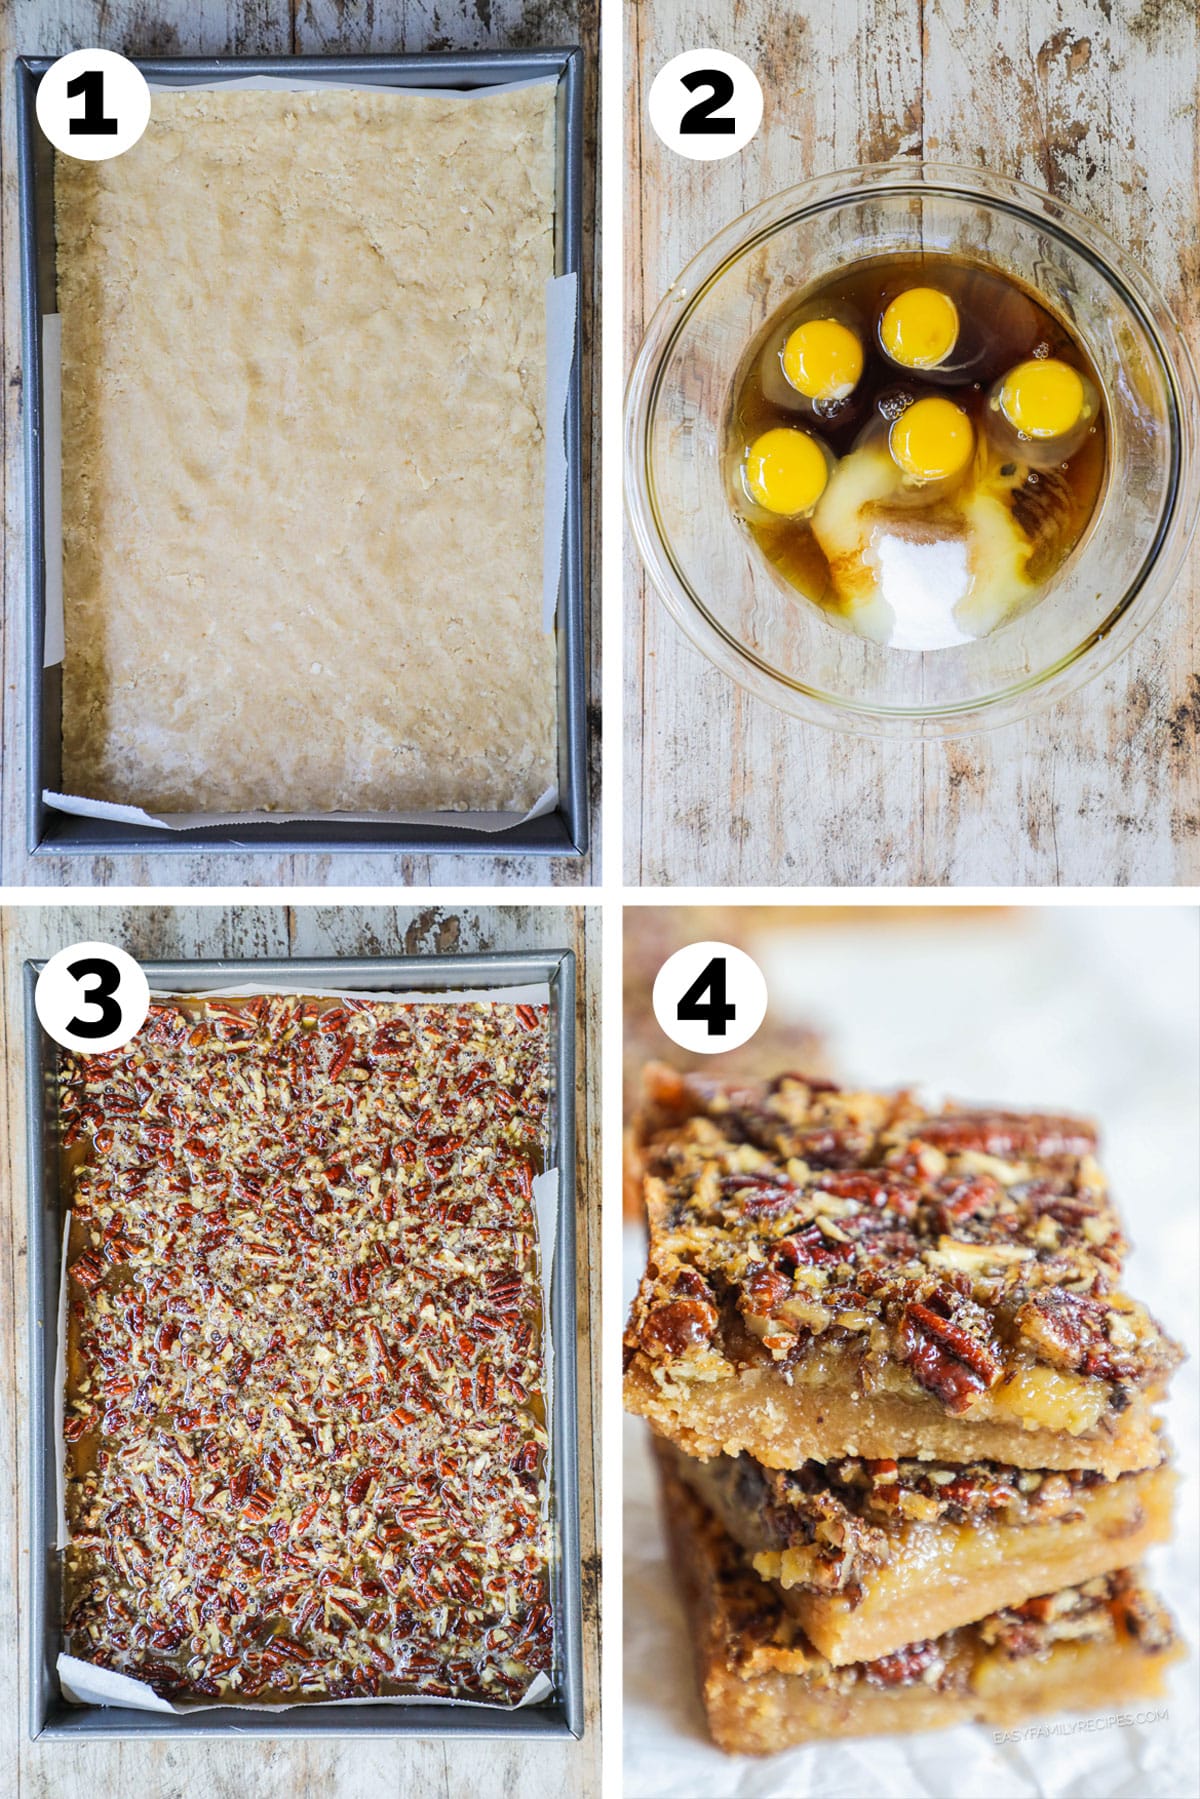 how to make pecan pie bars 1)make the crust, 2)make the filling, 3) assemble and bake, 4) serve!